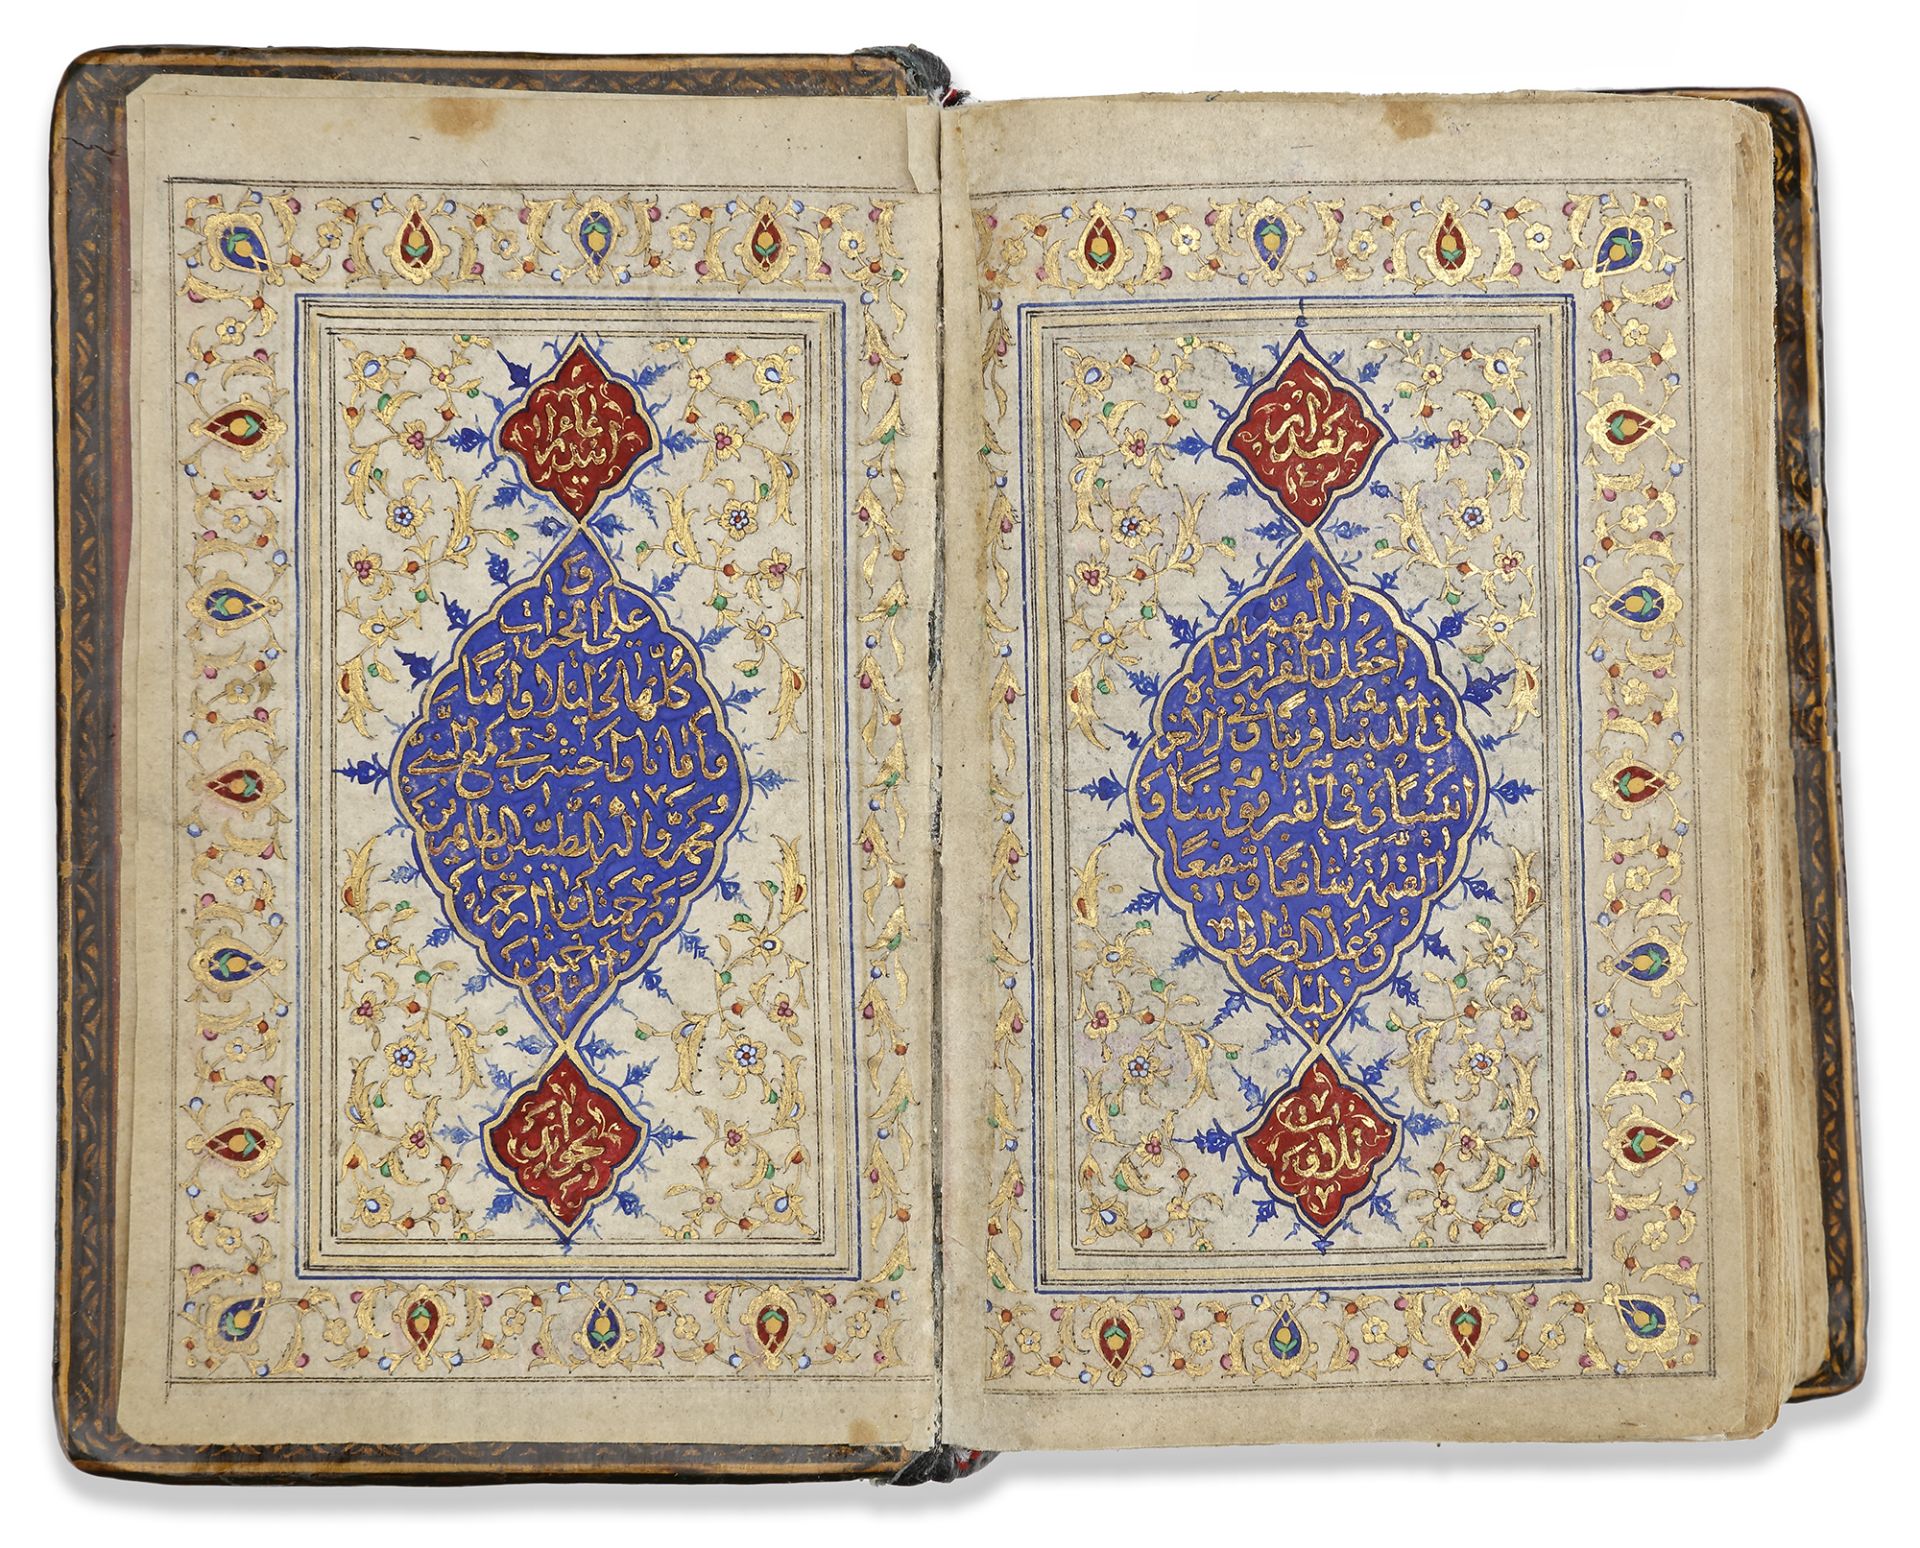 AN ILLUMINATED QAJAR QURAN BY ISMAIL IN 1244 AH/1828 AD - Image 4 of 6